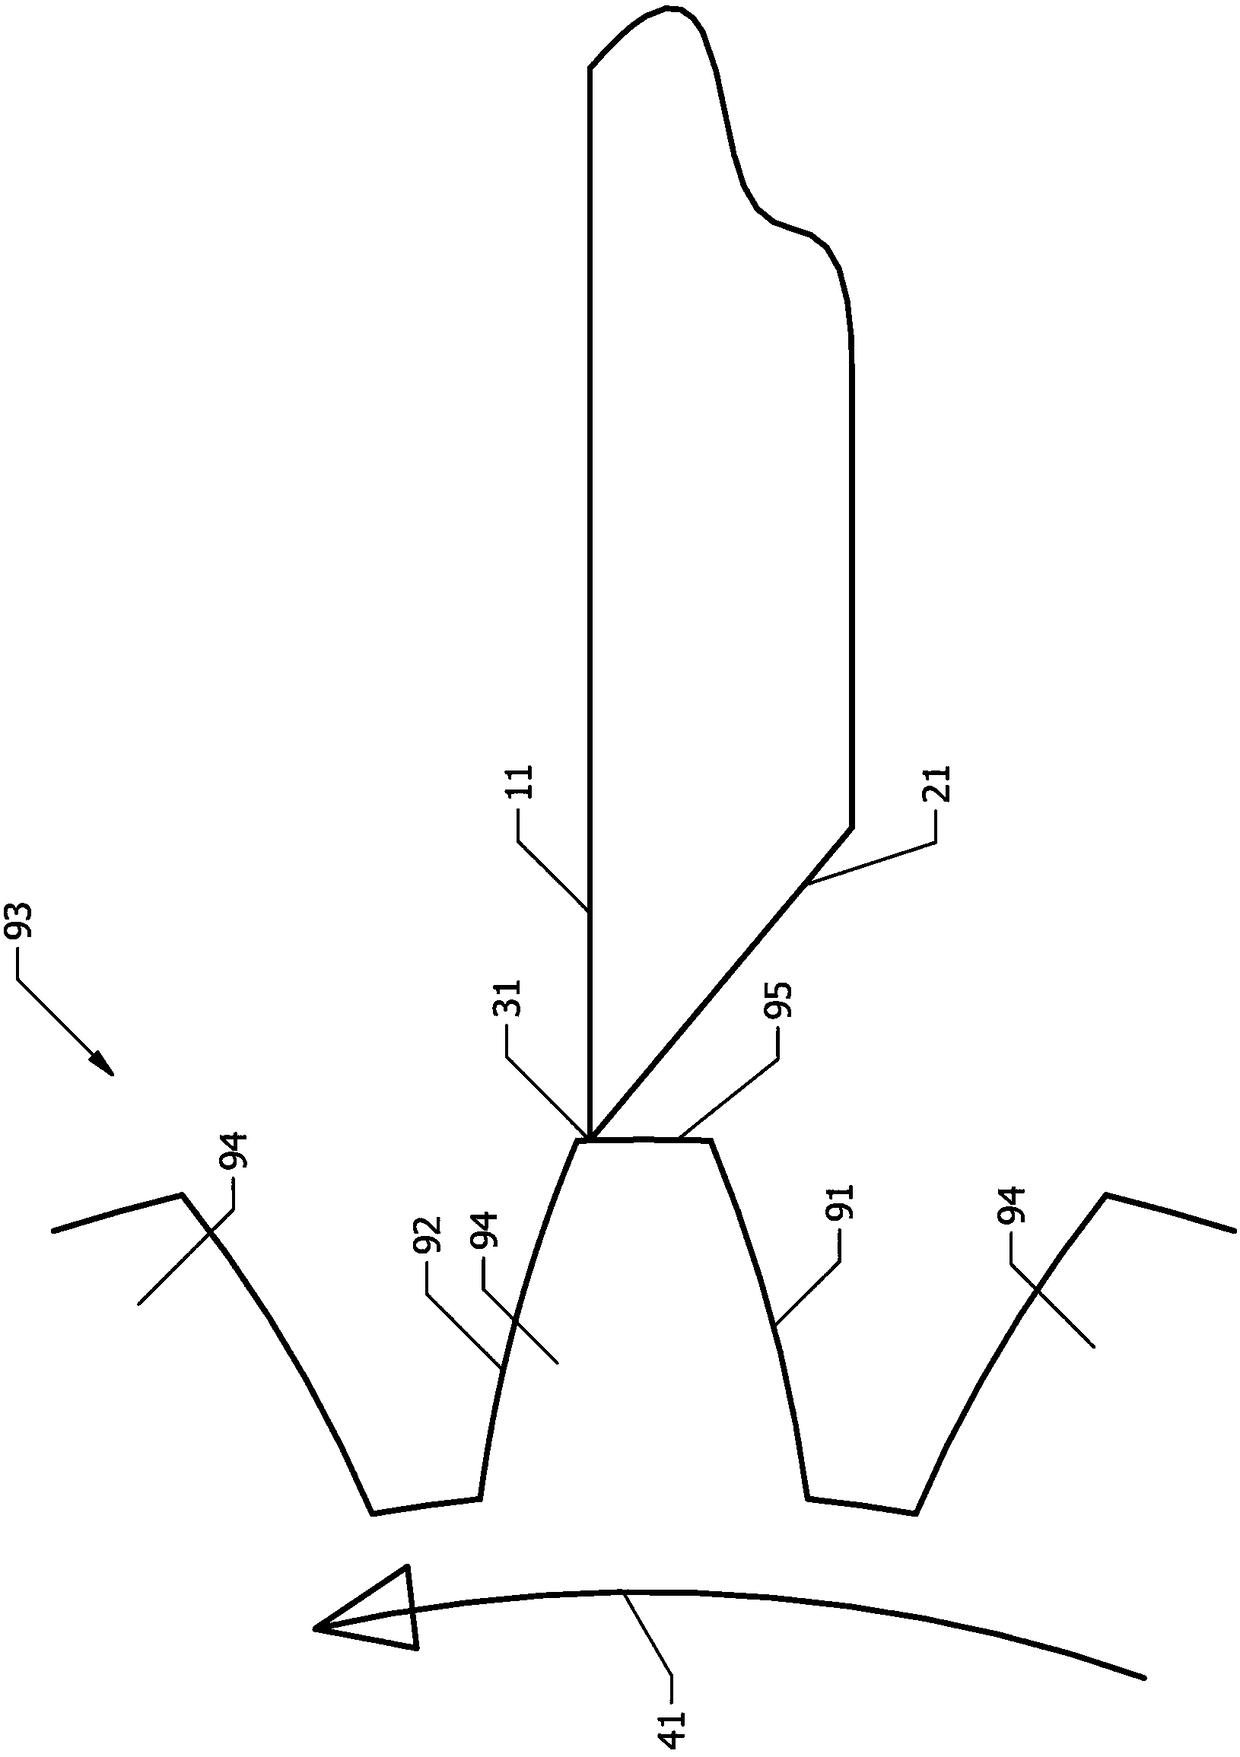 Method and apparatus for measuring a circumferential toothing contour of a toothed revolving object